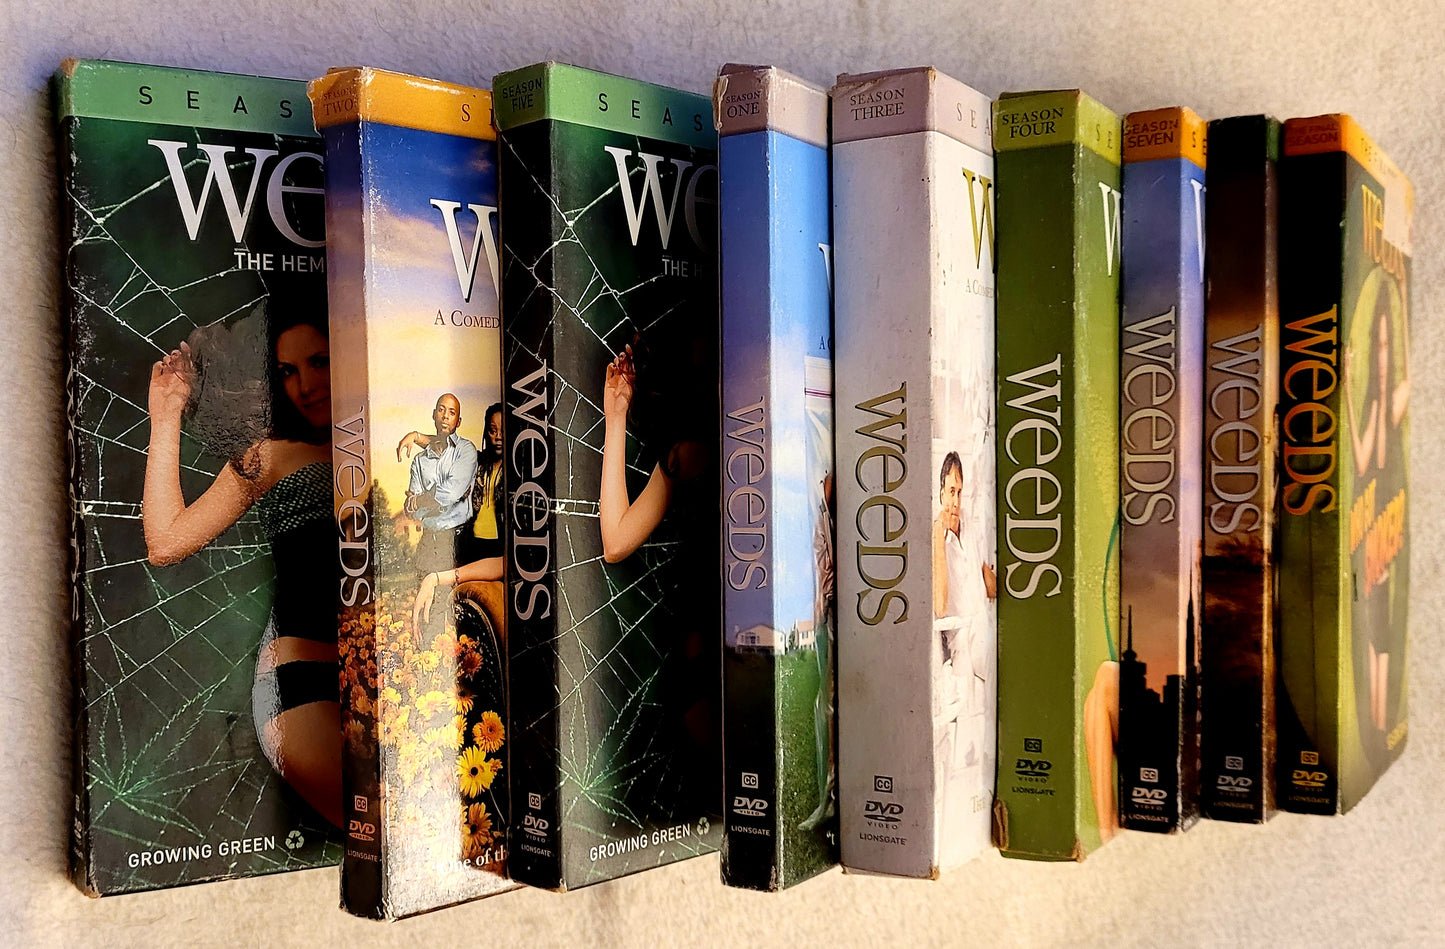 "The Weeds" DVD Collection: ALL SEASONS!!